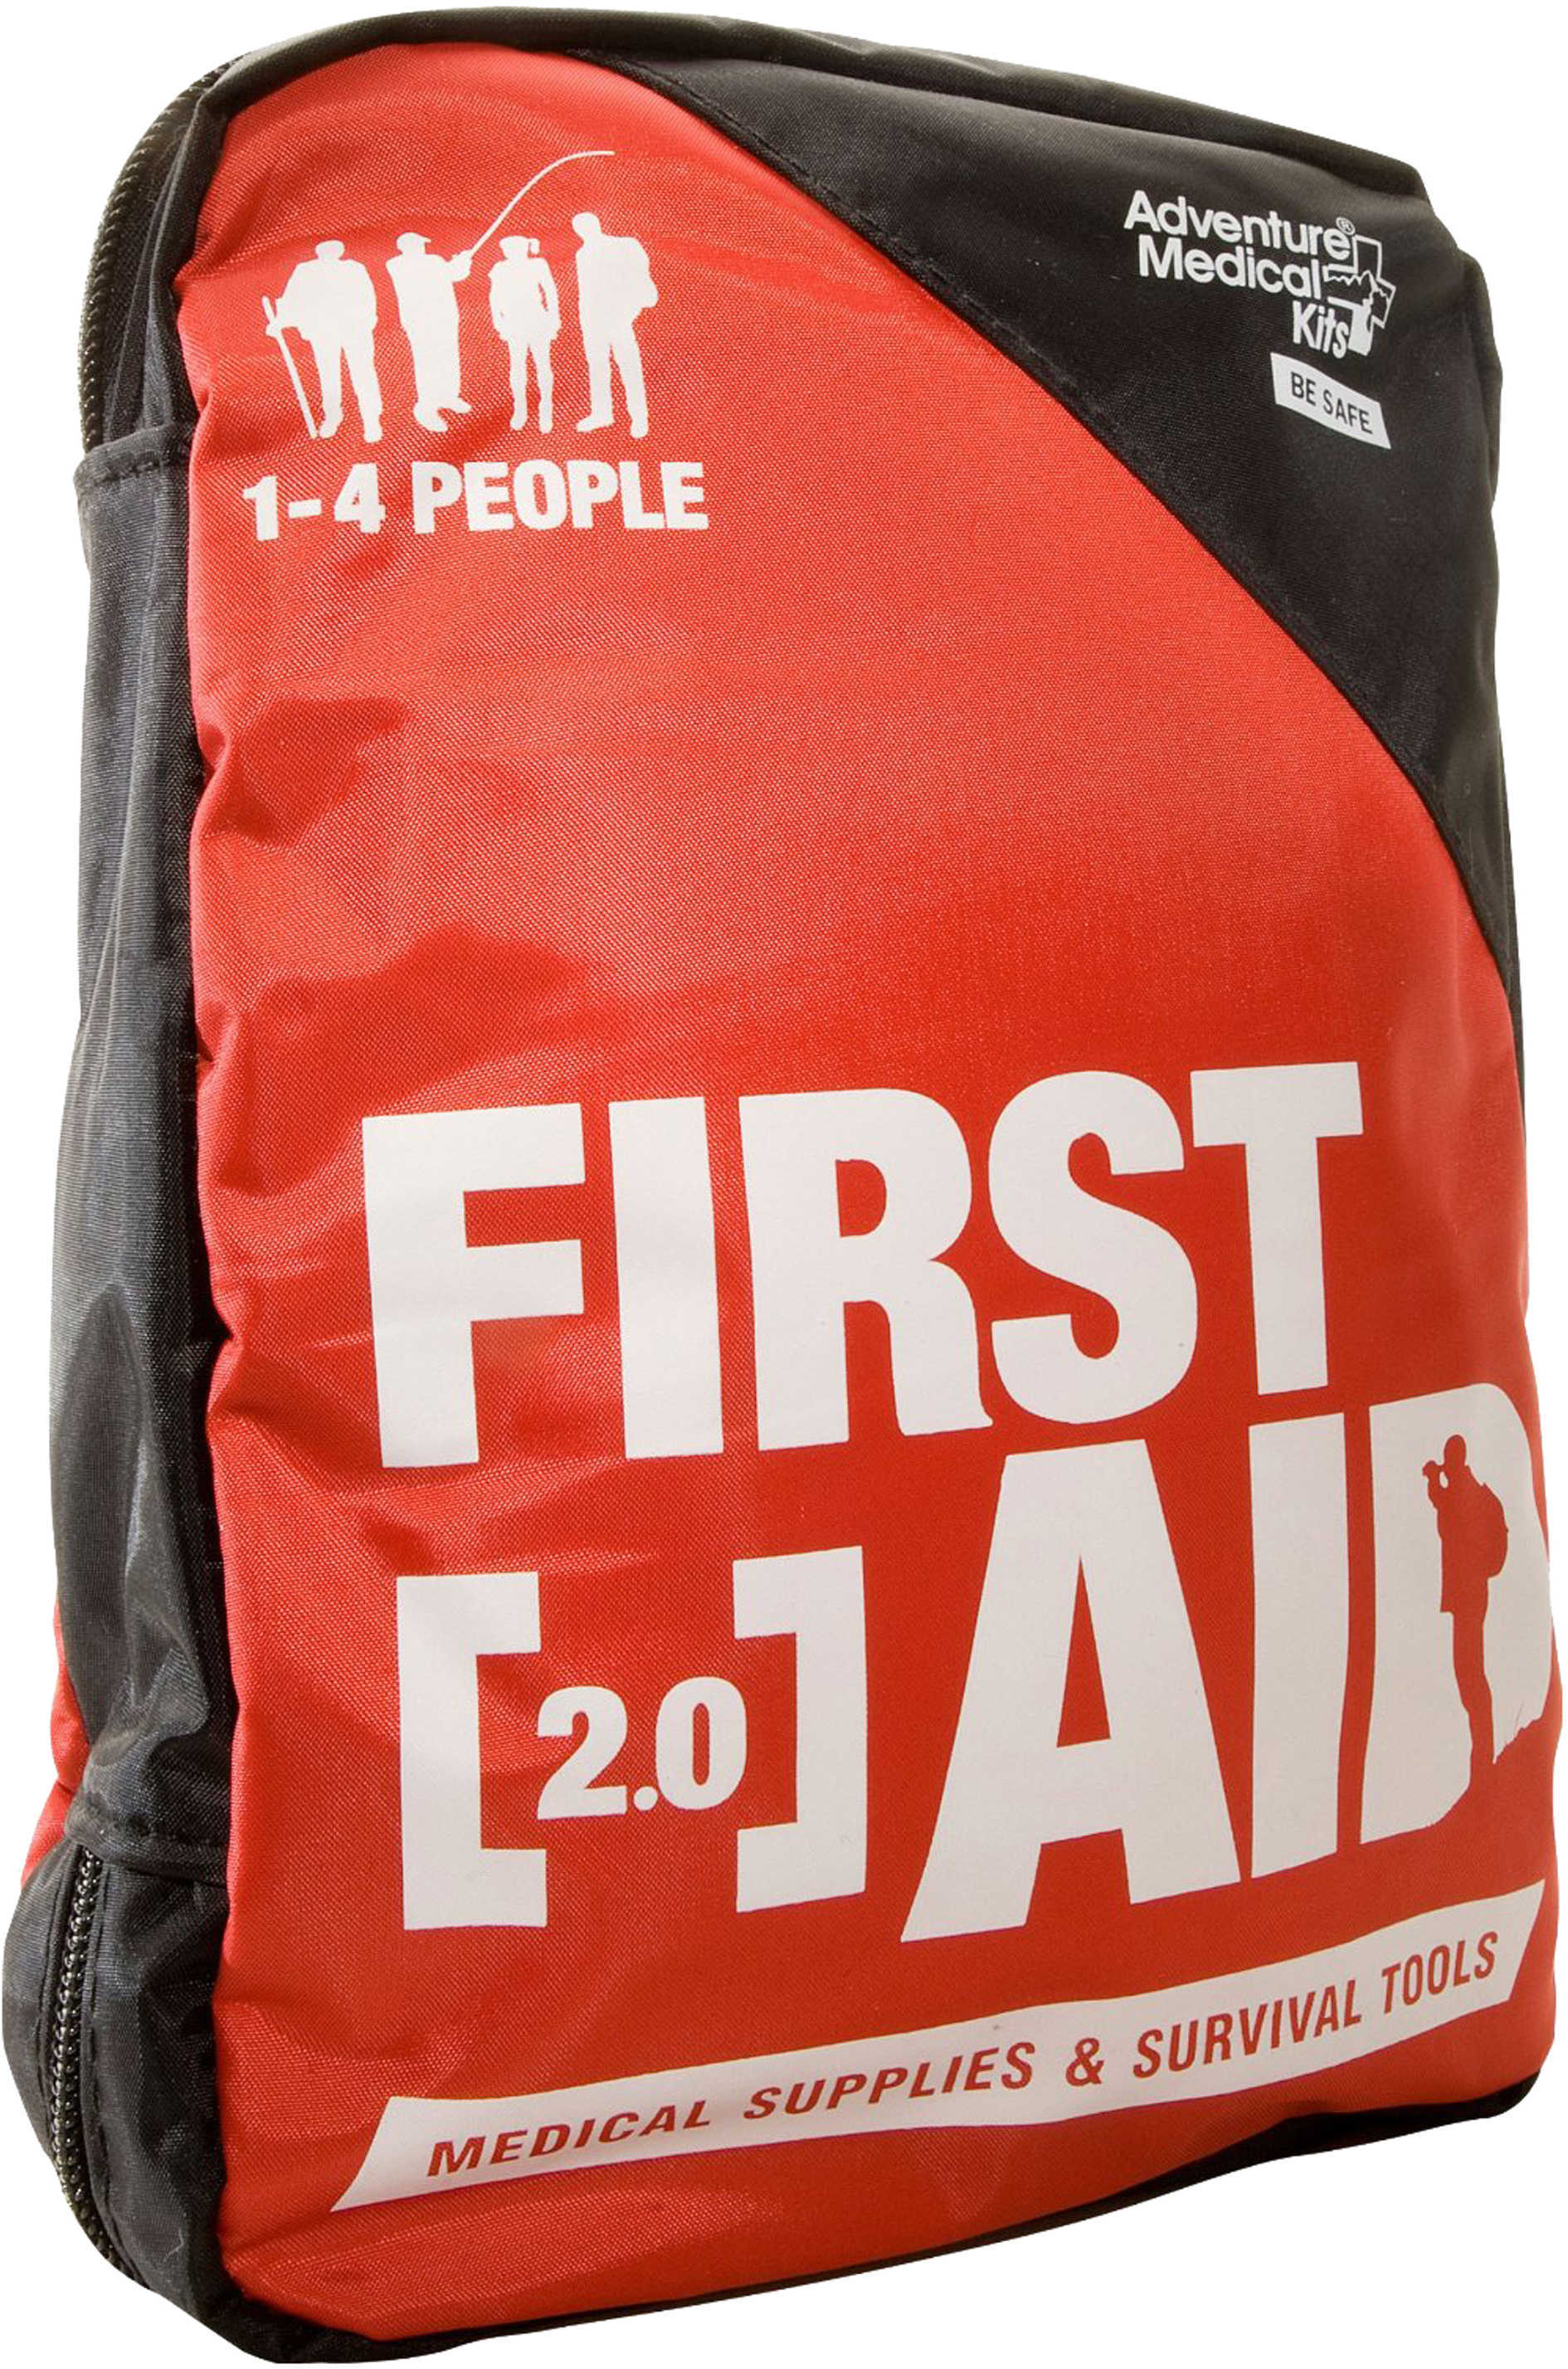 Adventure Medical Kits / Tender Corp First Aid 2 0120-0220